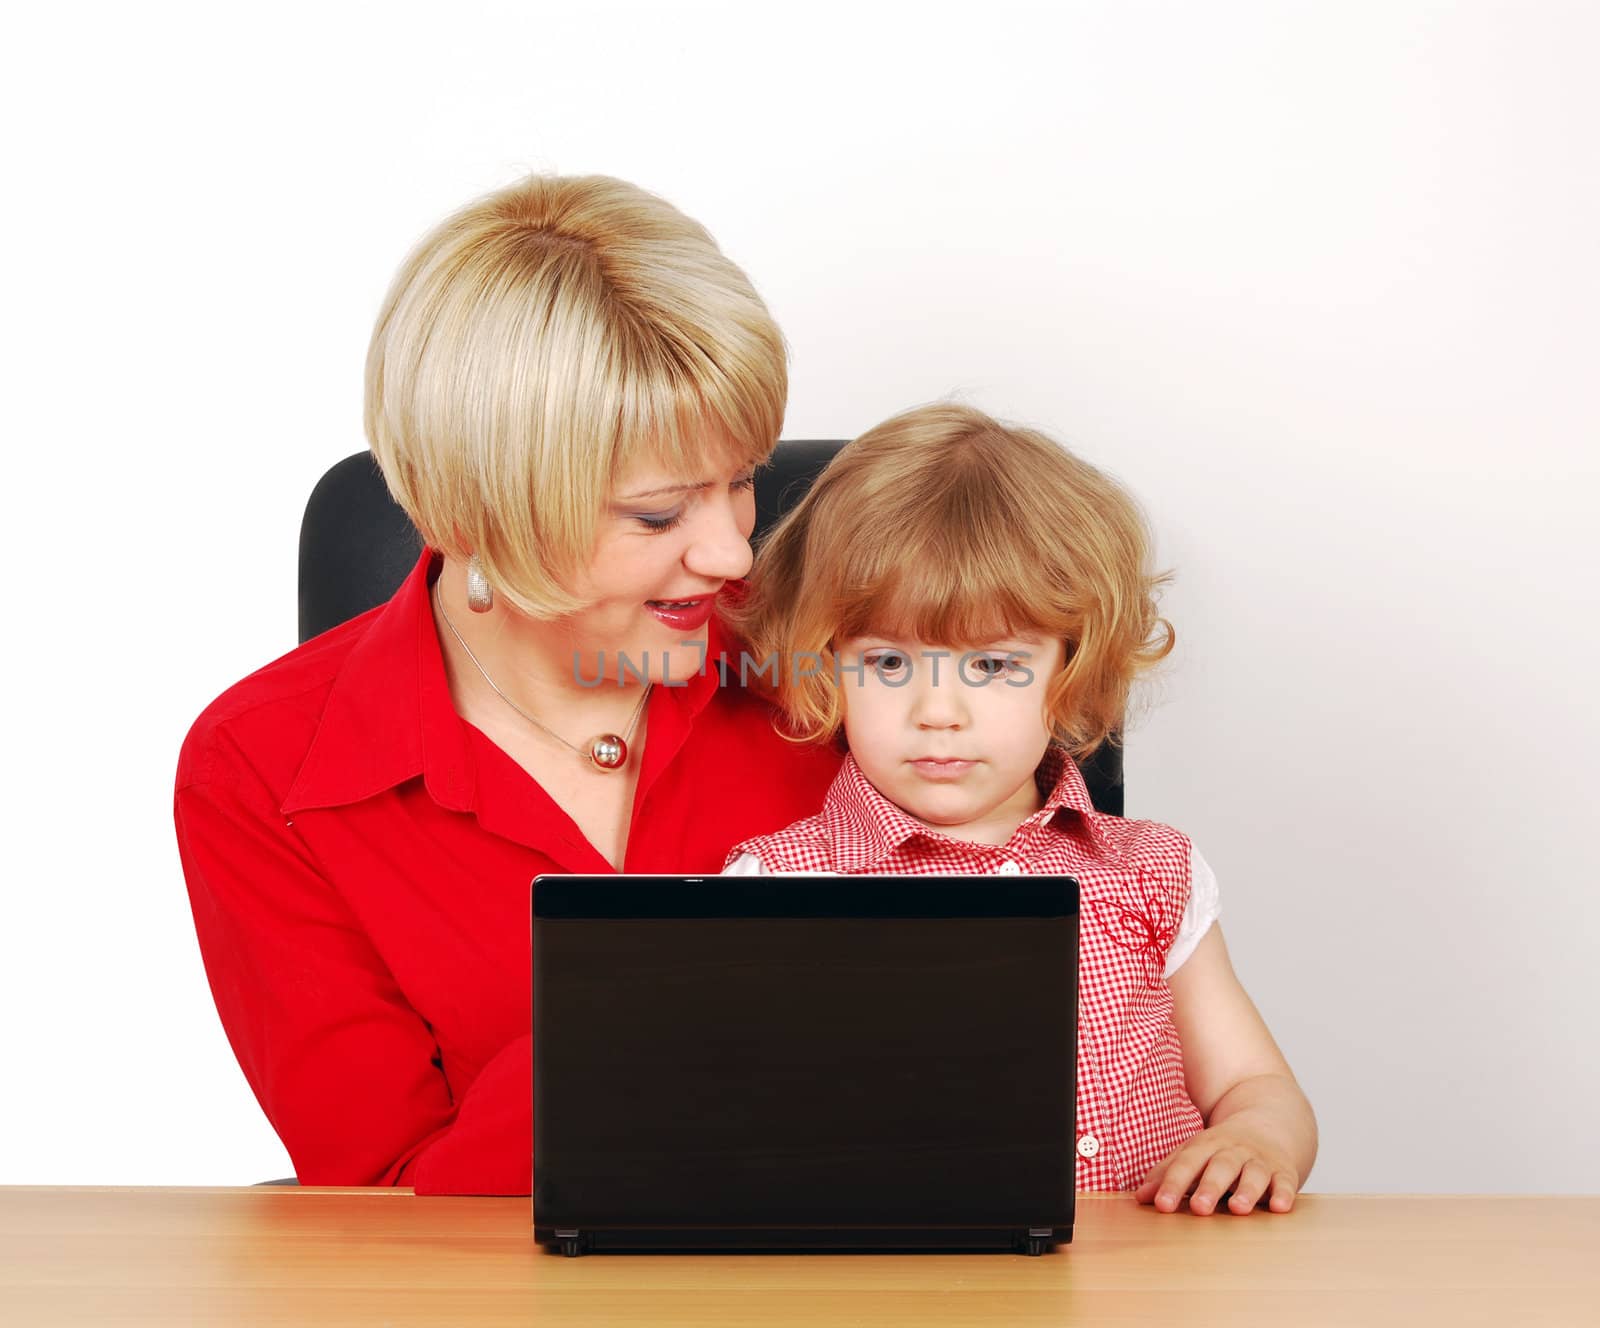 Woman and little girl with laptop studio shot by goce